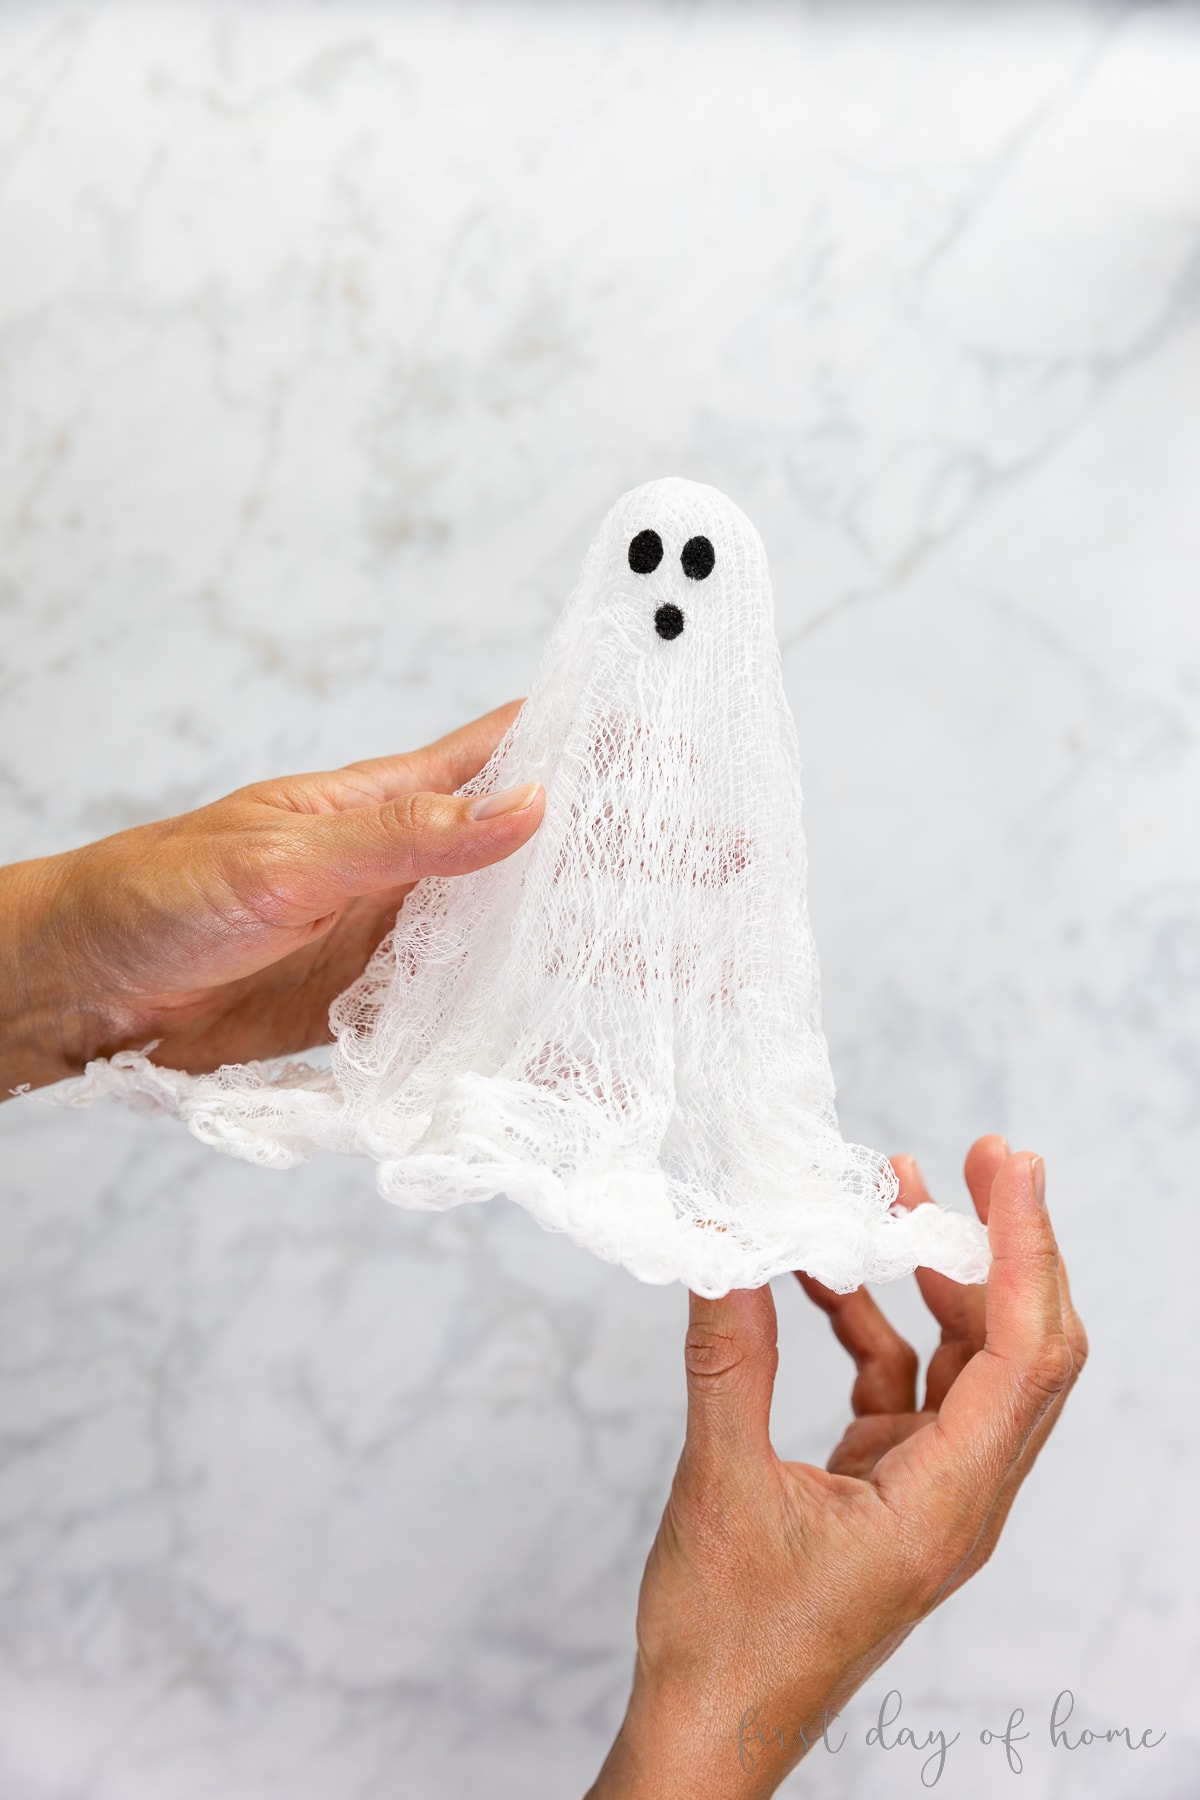 Finished cheesecloth ghost with eyes and mouth